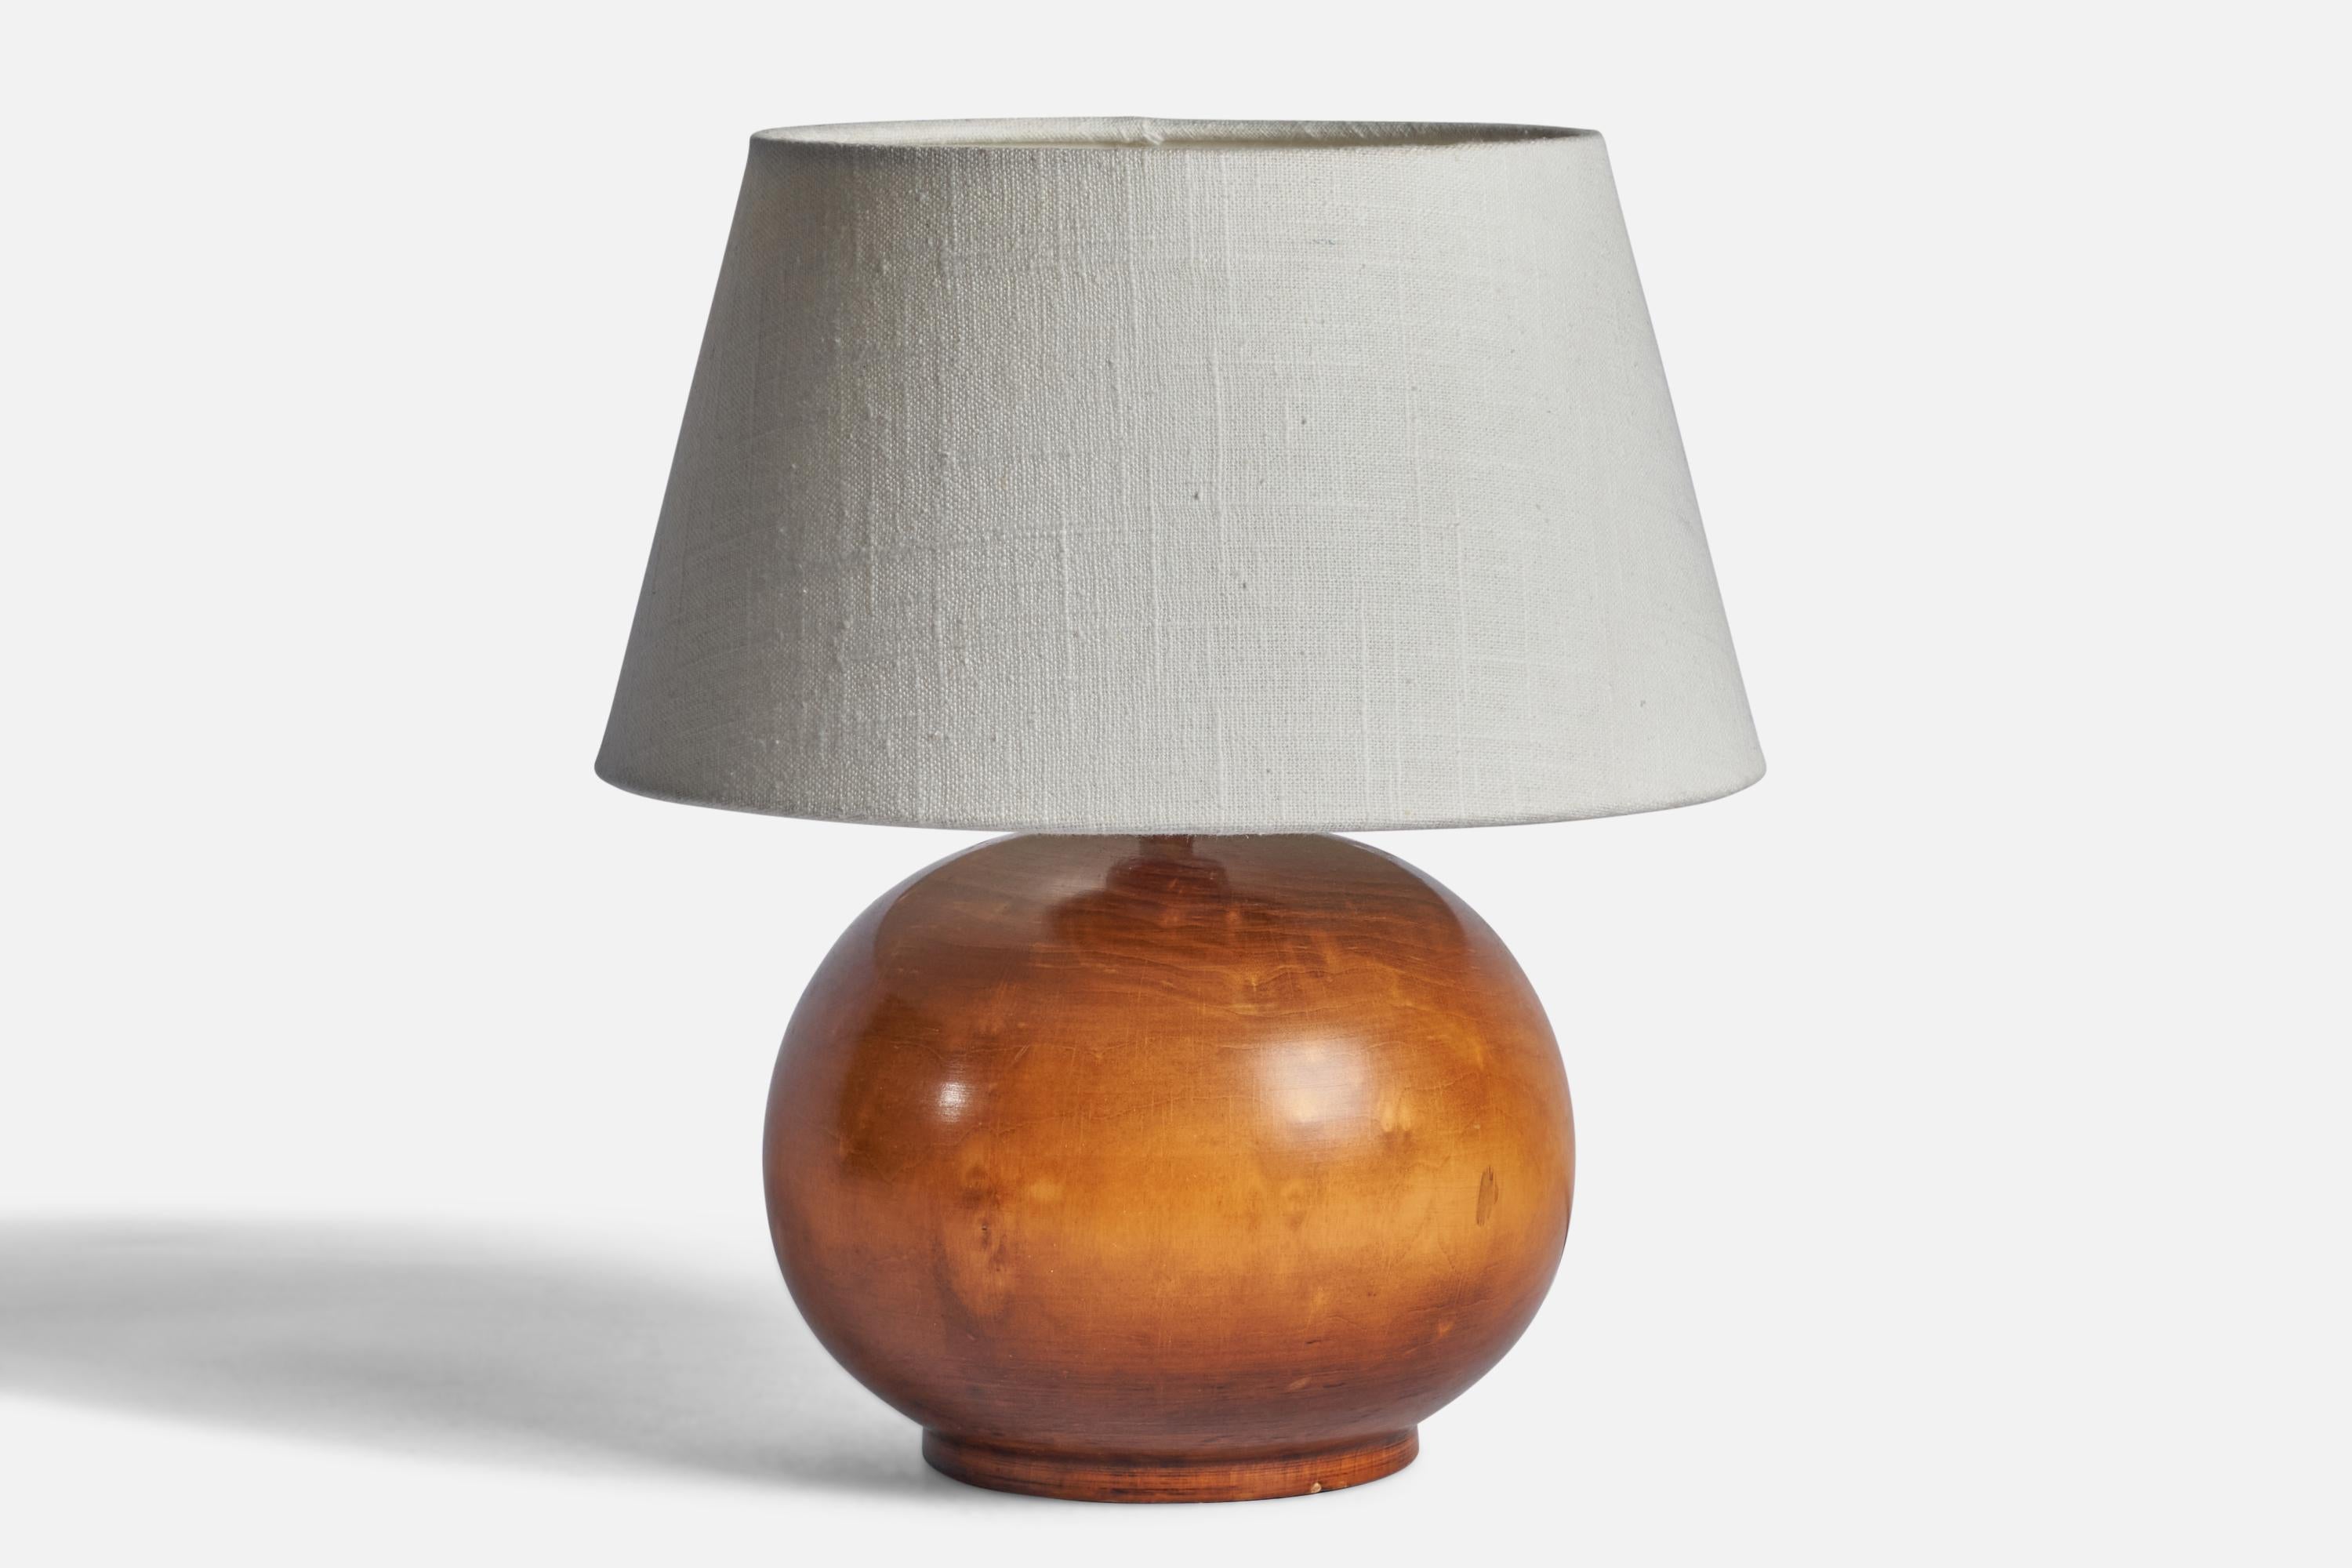 A lacquered wood table lamp designed and produced in Sweden, c. 1950s.

Dimensions of Lamp (inches): 8.45